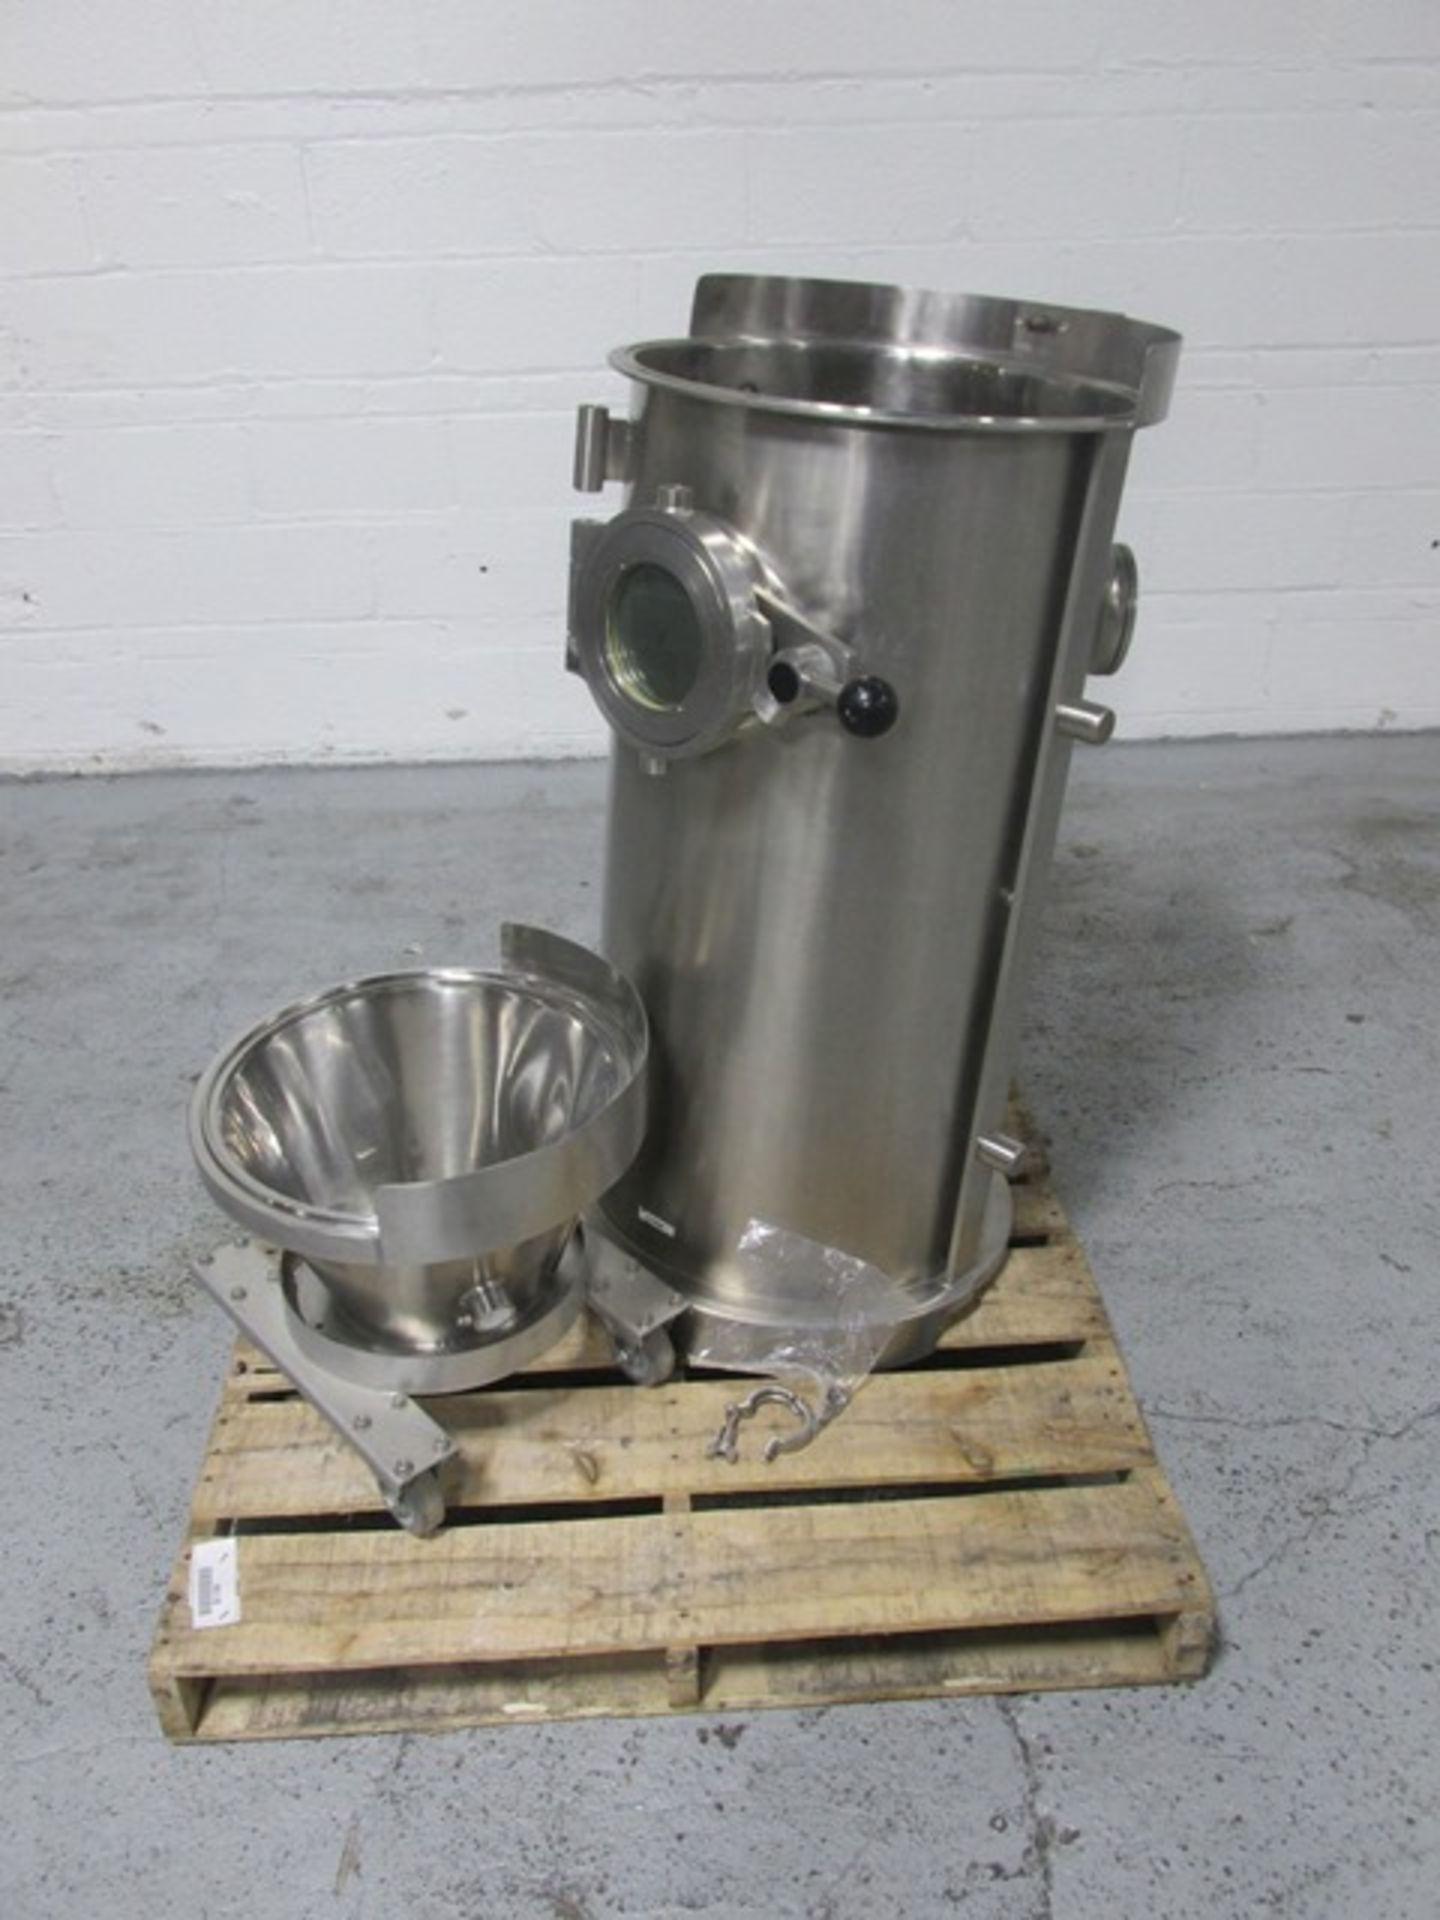 Glatt GPCG5 pieces, consisting of (1) bowl and (1) expansion chamber